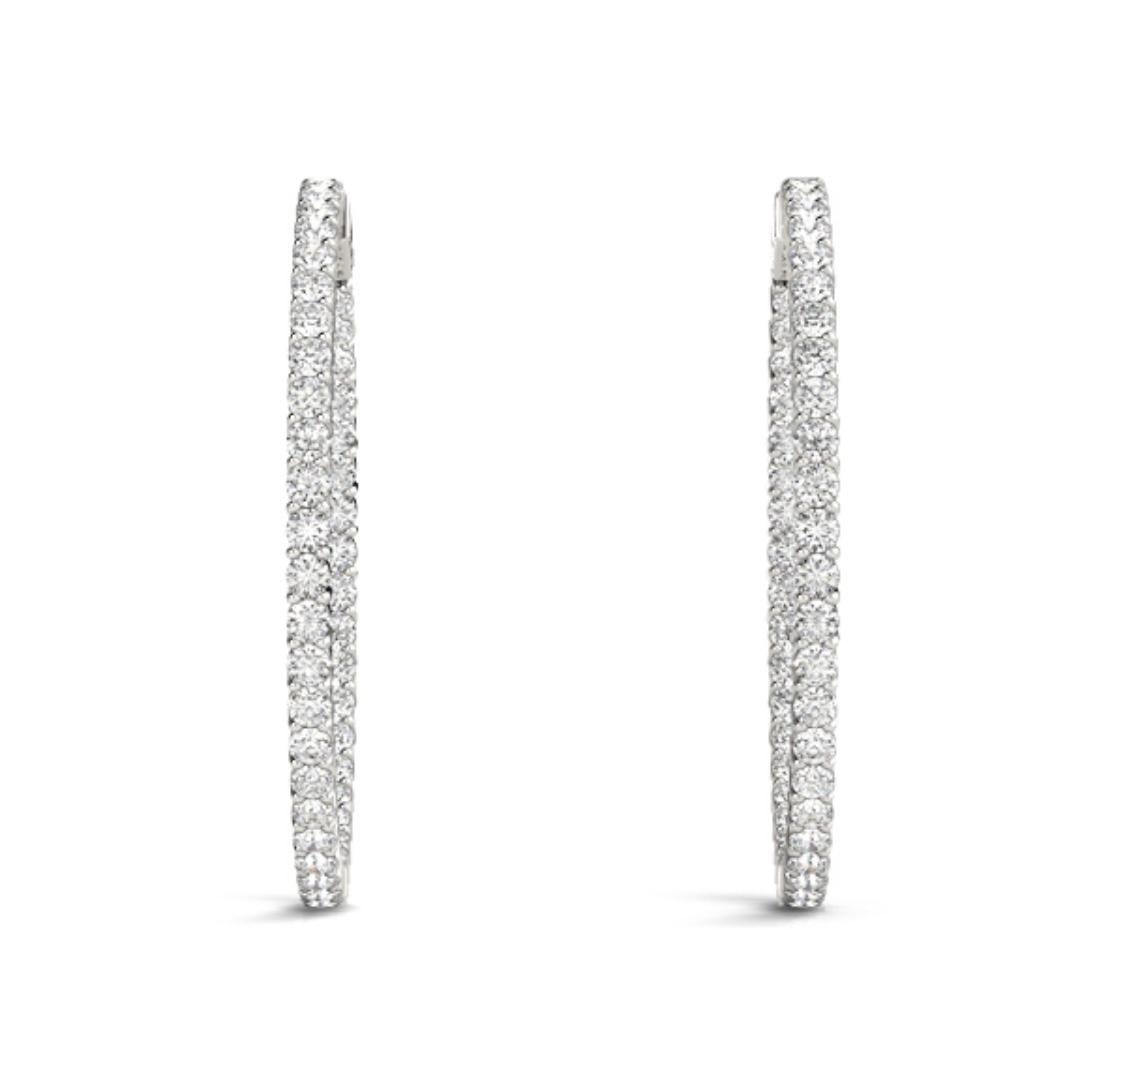 Elegant and beautiful Diamond Hoop Earrings containing 66 Round Brilliant Diamonds weighing 1.92 Carats.
Set in 14 Karat White Gold.
Measures 1.5 inches.